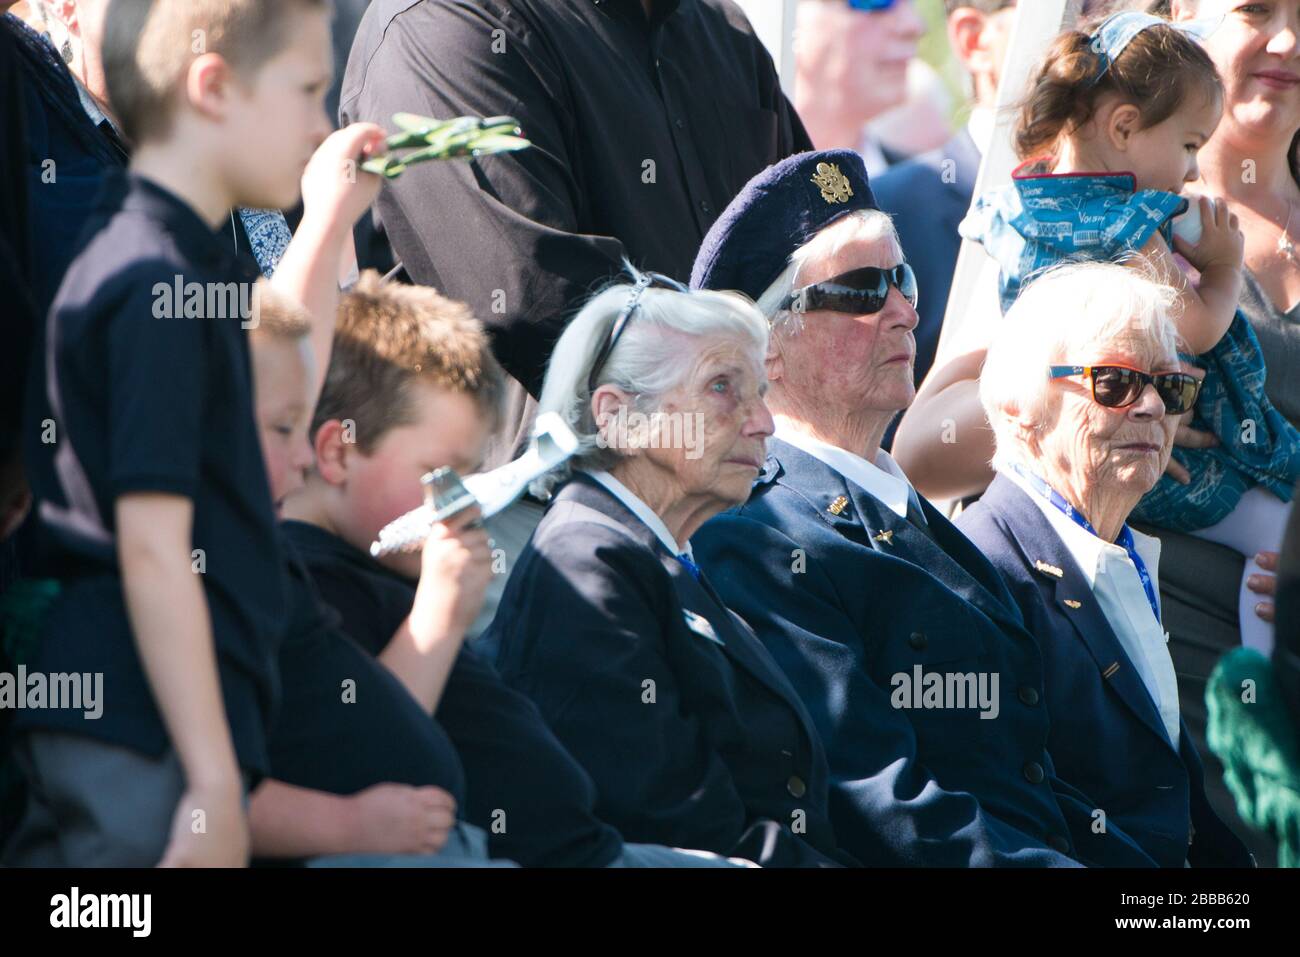 'Mourners attend the graveside service for United States Army Air Forces (Women Air Force Service Pilot) Florence Elaine Danforth Harmon in Arlington National Cemetery, Sept. 7, 2016, in Arlington, Va. Harmon was inurned in Columbarium Court 9. (U.S. Army photo by Rachel Larue/Arlington National Cemetery/released); 7 September 2016, 10:18; Graveside service for United States Army Air Forces (Women Air Force Service Pilot) Florence Elaine Danforth Harmon in Arlington National Cemetery; Arlington National Cemetery; ' Stock Photo